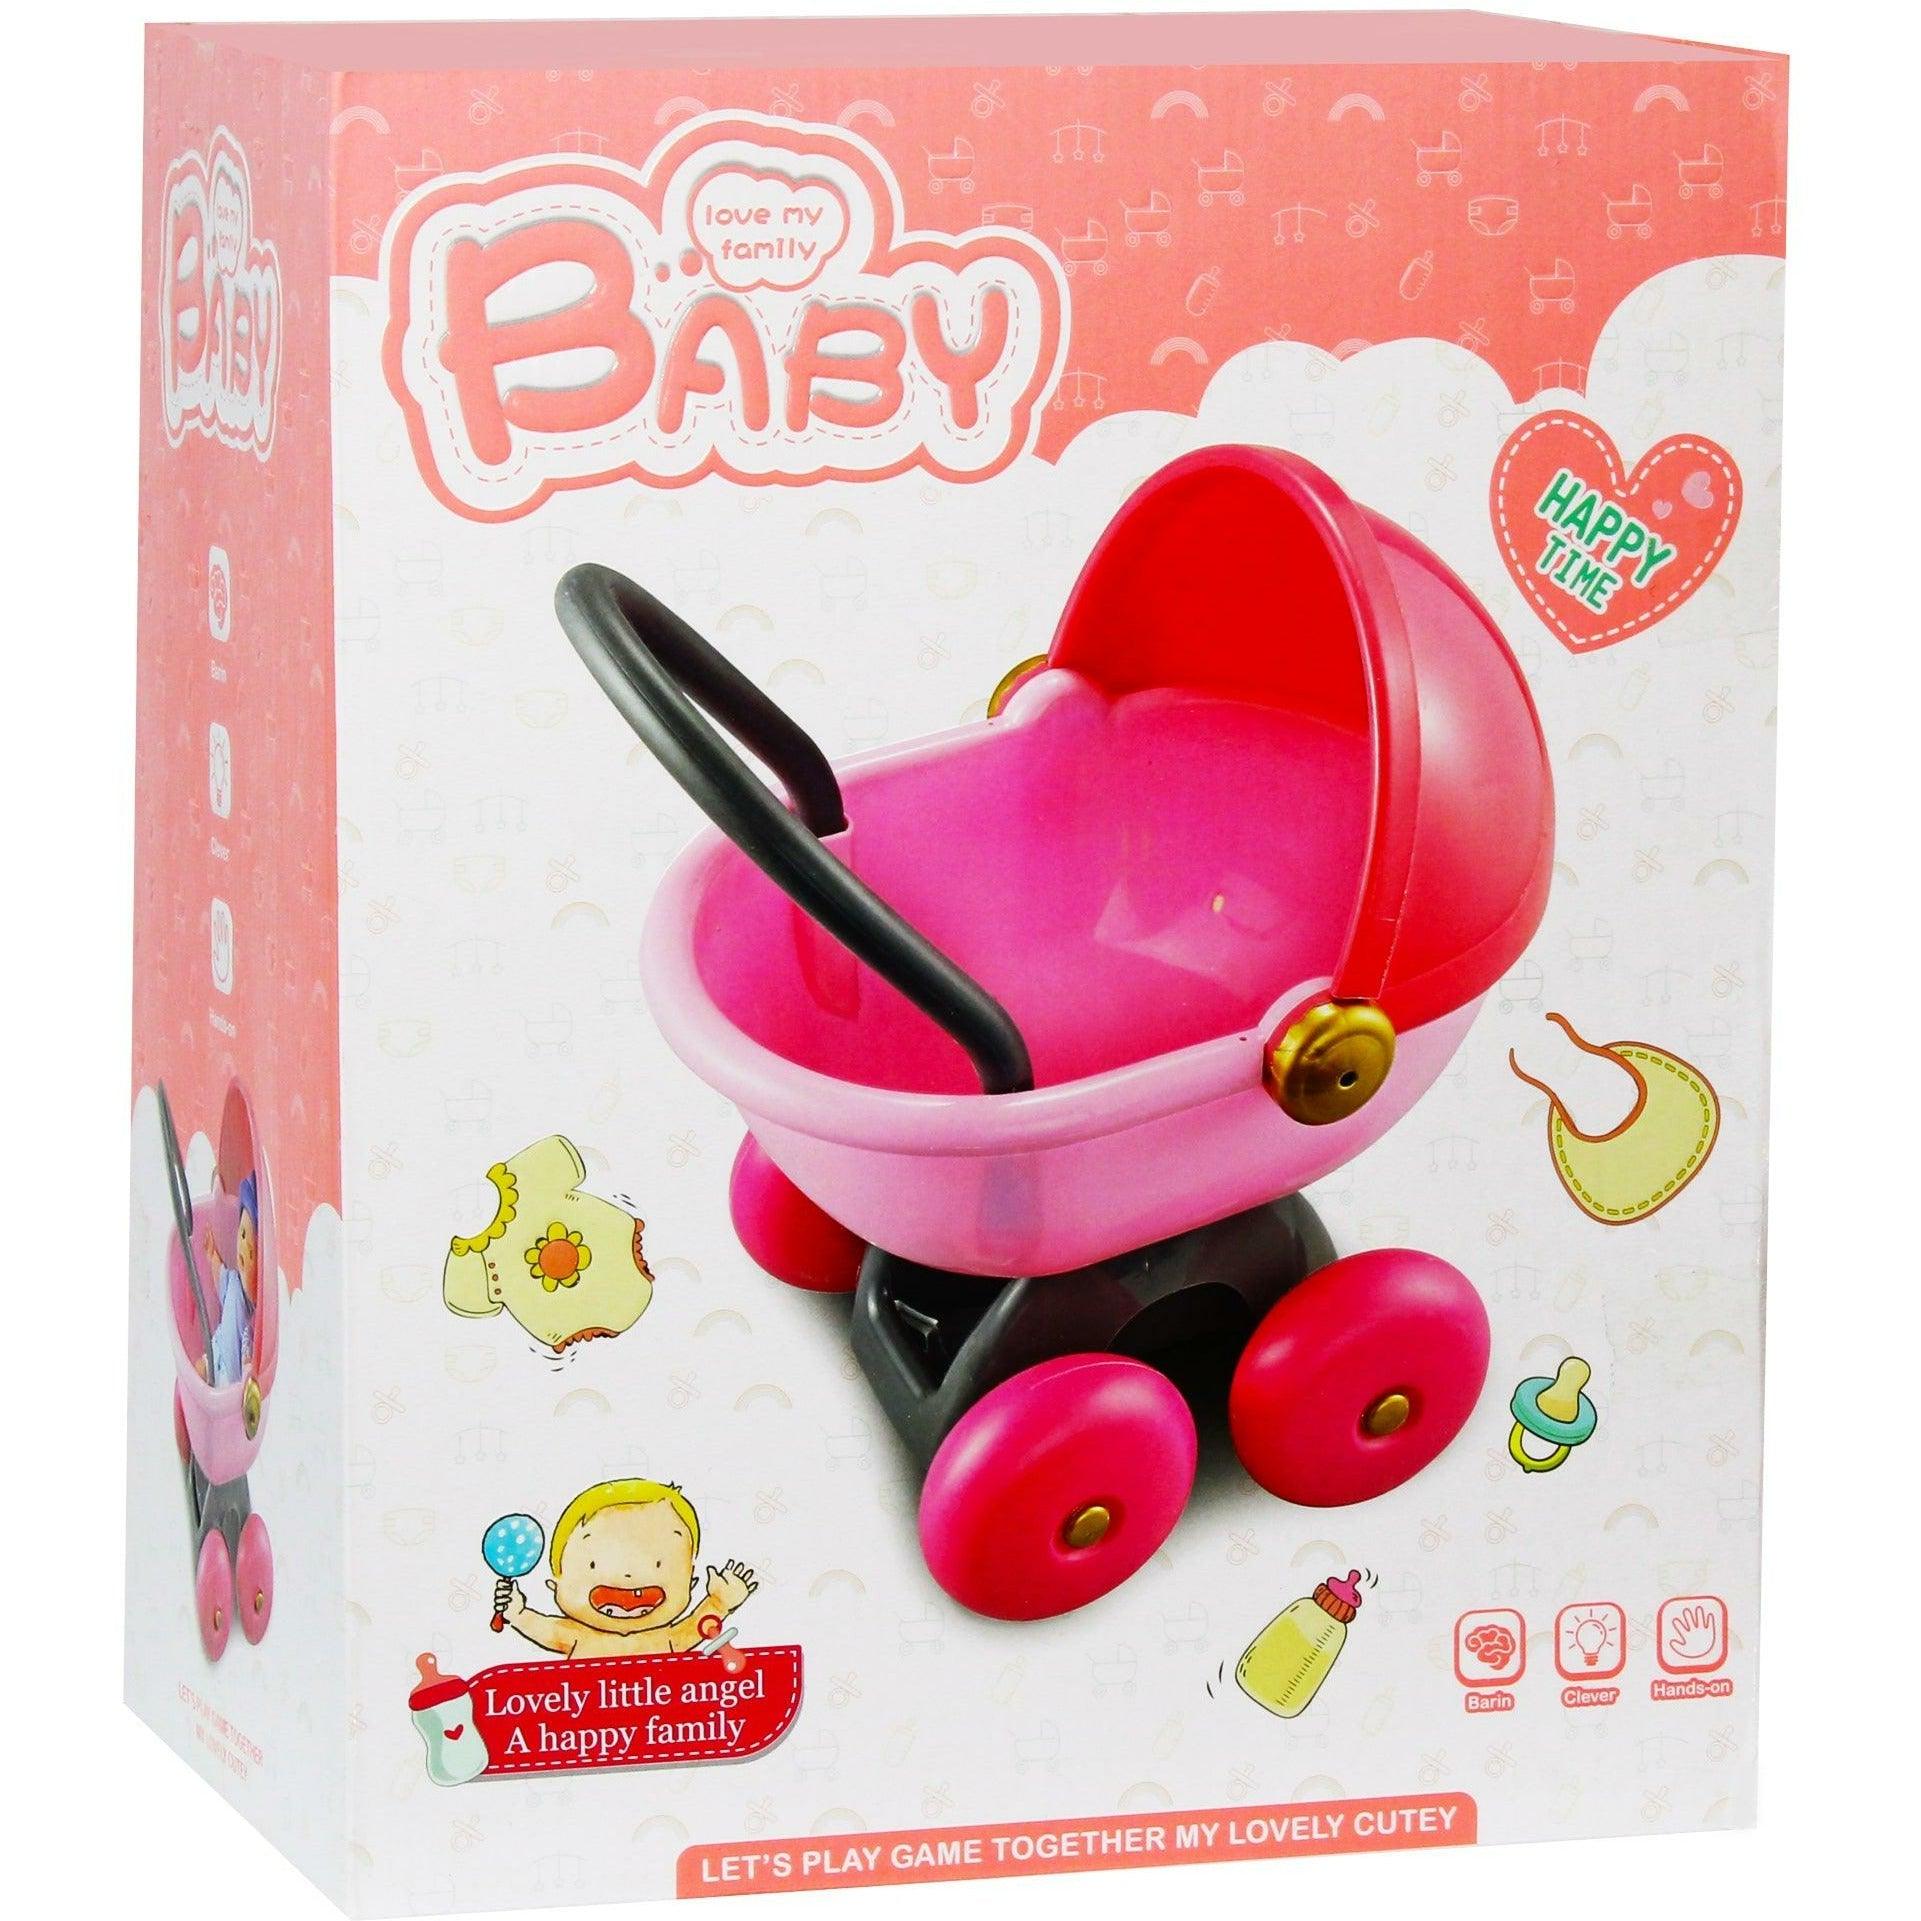 Baby Learning Walker Dolls Car For Growing up Healthy - BumbleToys - 0-24 Months, Gifts Paradise, Girls, Learning Toys, Walker